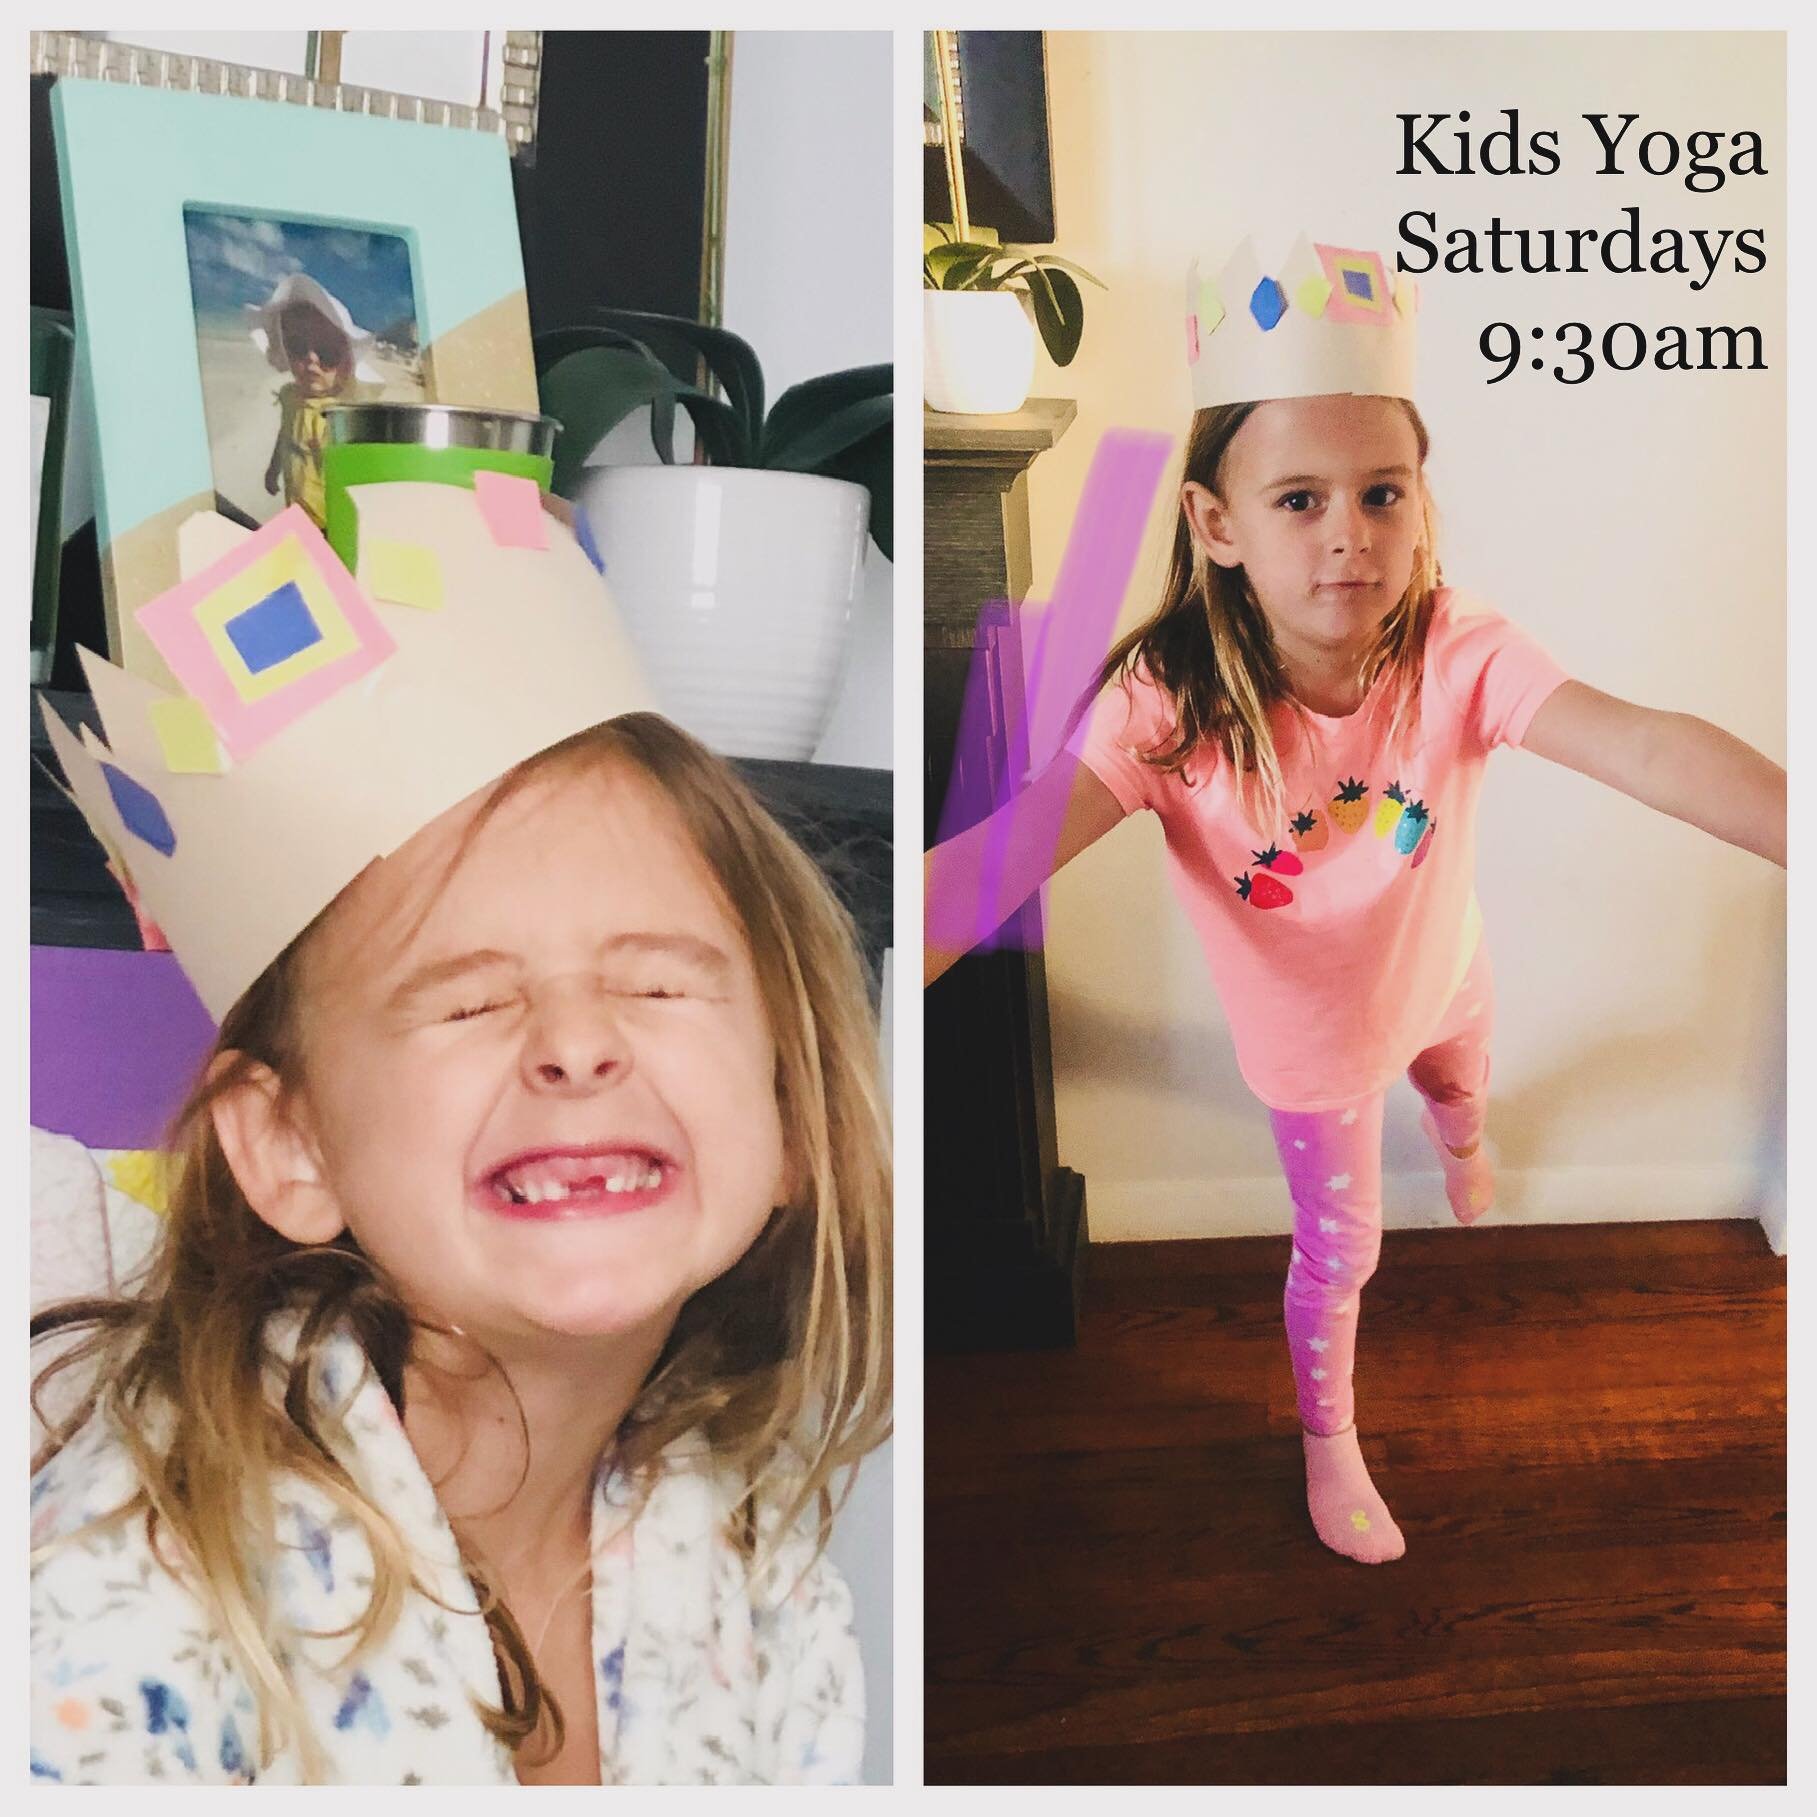 🧘🏻&zwj;♀️ 👧 Our meditation craft this Saturday 4/27 at Kids Yoga will be CROWNS❕👑 
Here are some reasons why 🧘🏻 YOGA 🧘🏻 is beneficial: 
✨Calming effect
✨Boosts mood
✨Builds confidence 
✨Fosters connection
✨Increases stamina
✨It&rsquo;s fun❕
O